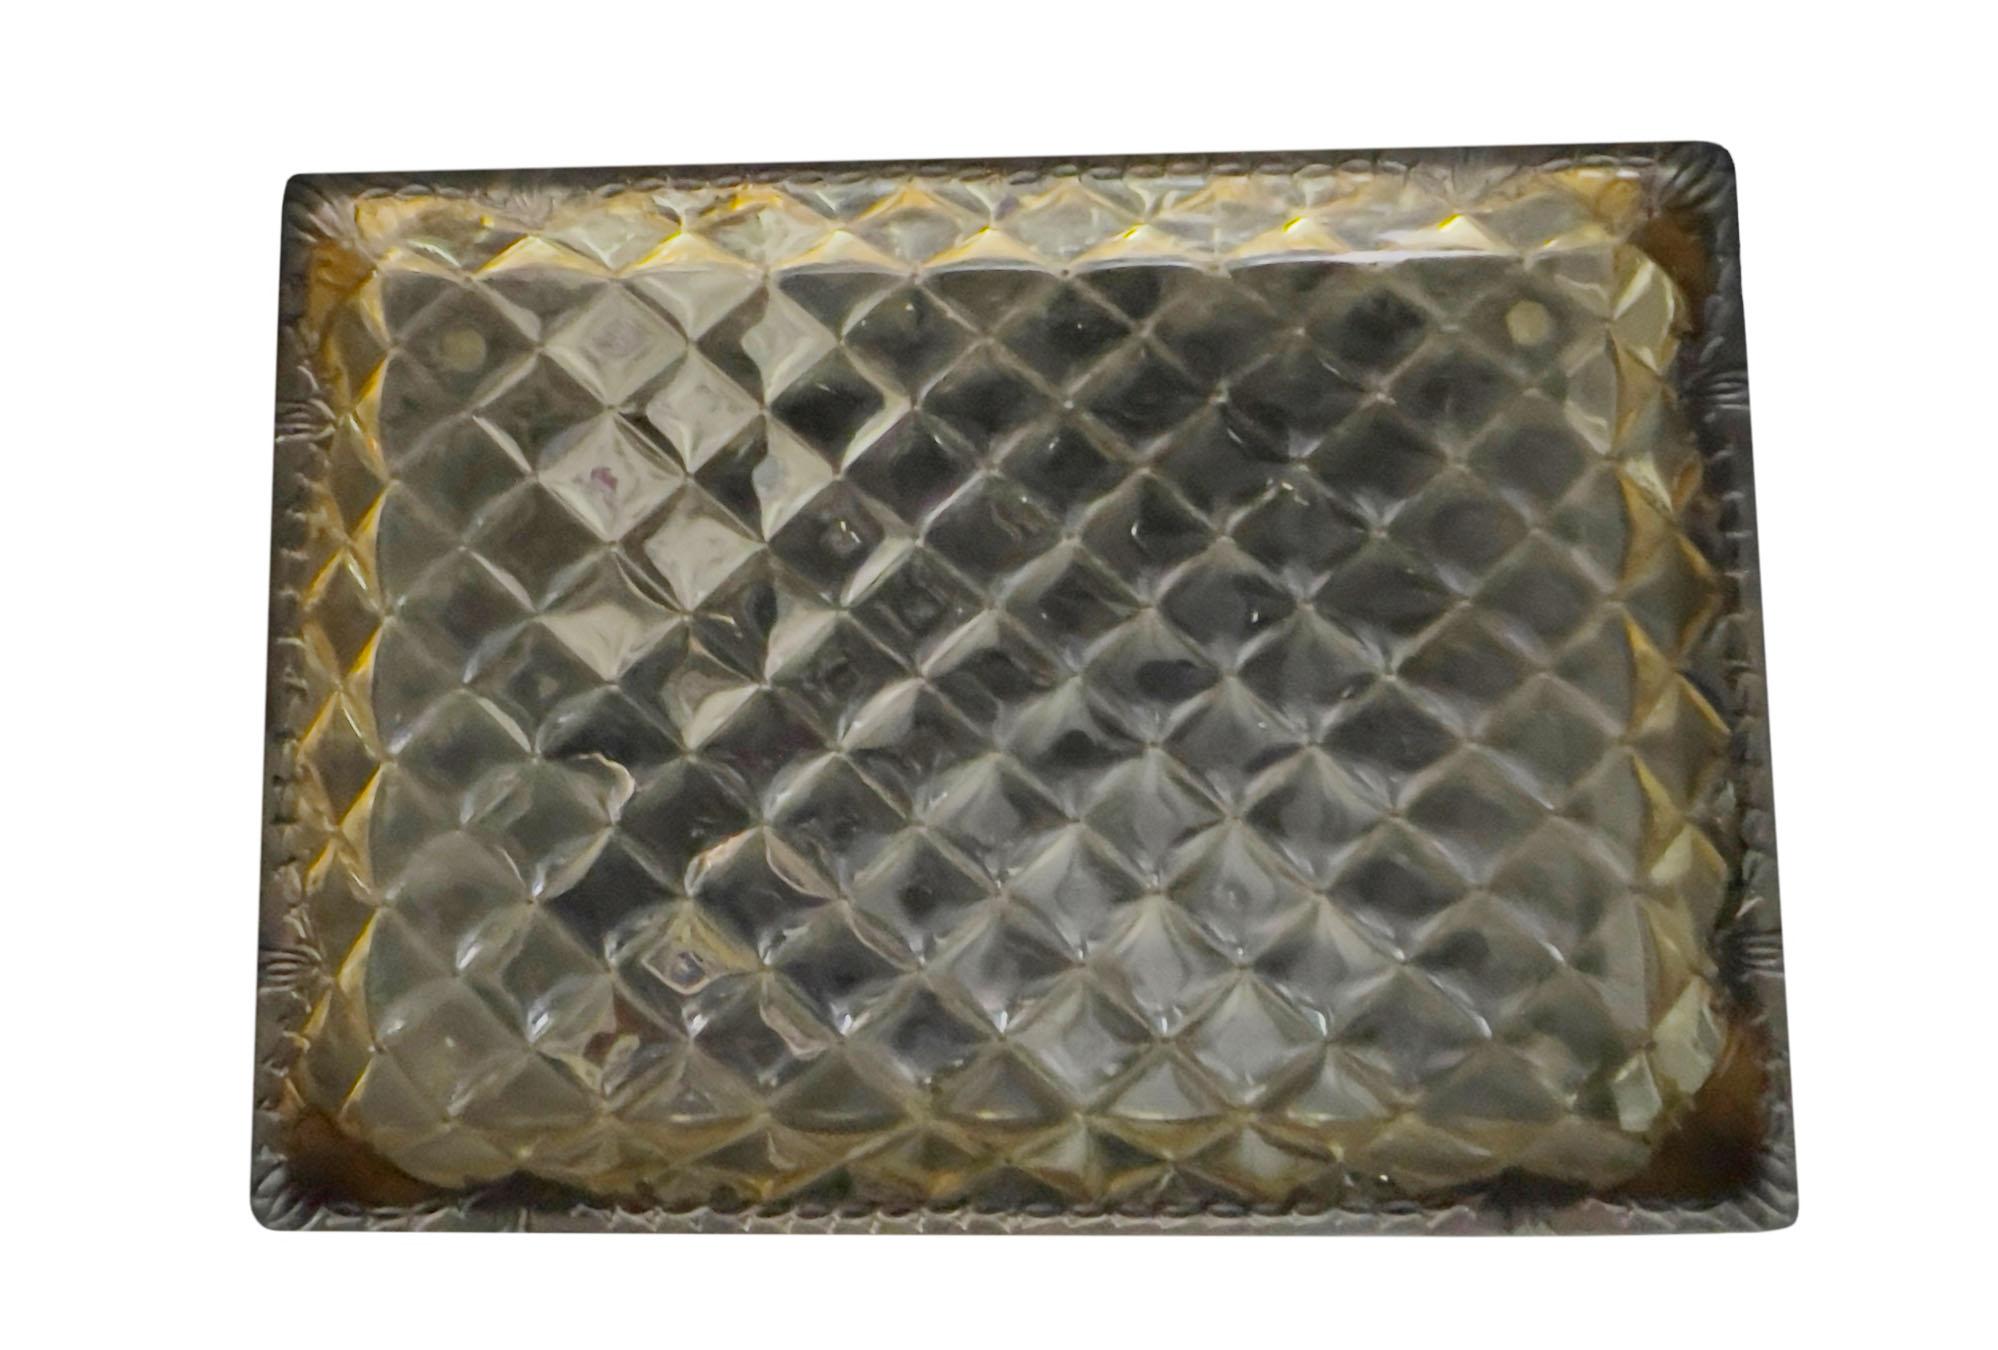 A wonderful diamond shaped gold lucite tray with dark metal. Edge with art deco designs. Circa 1960s. 